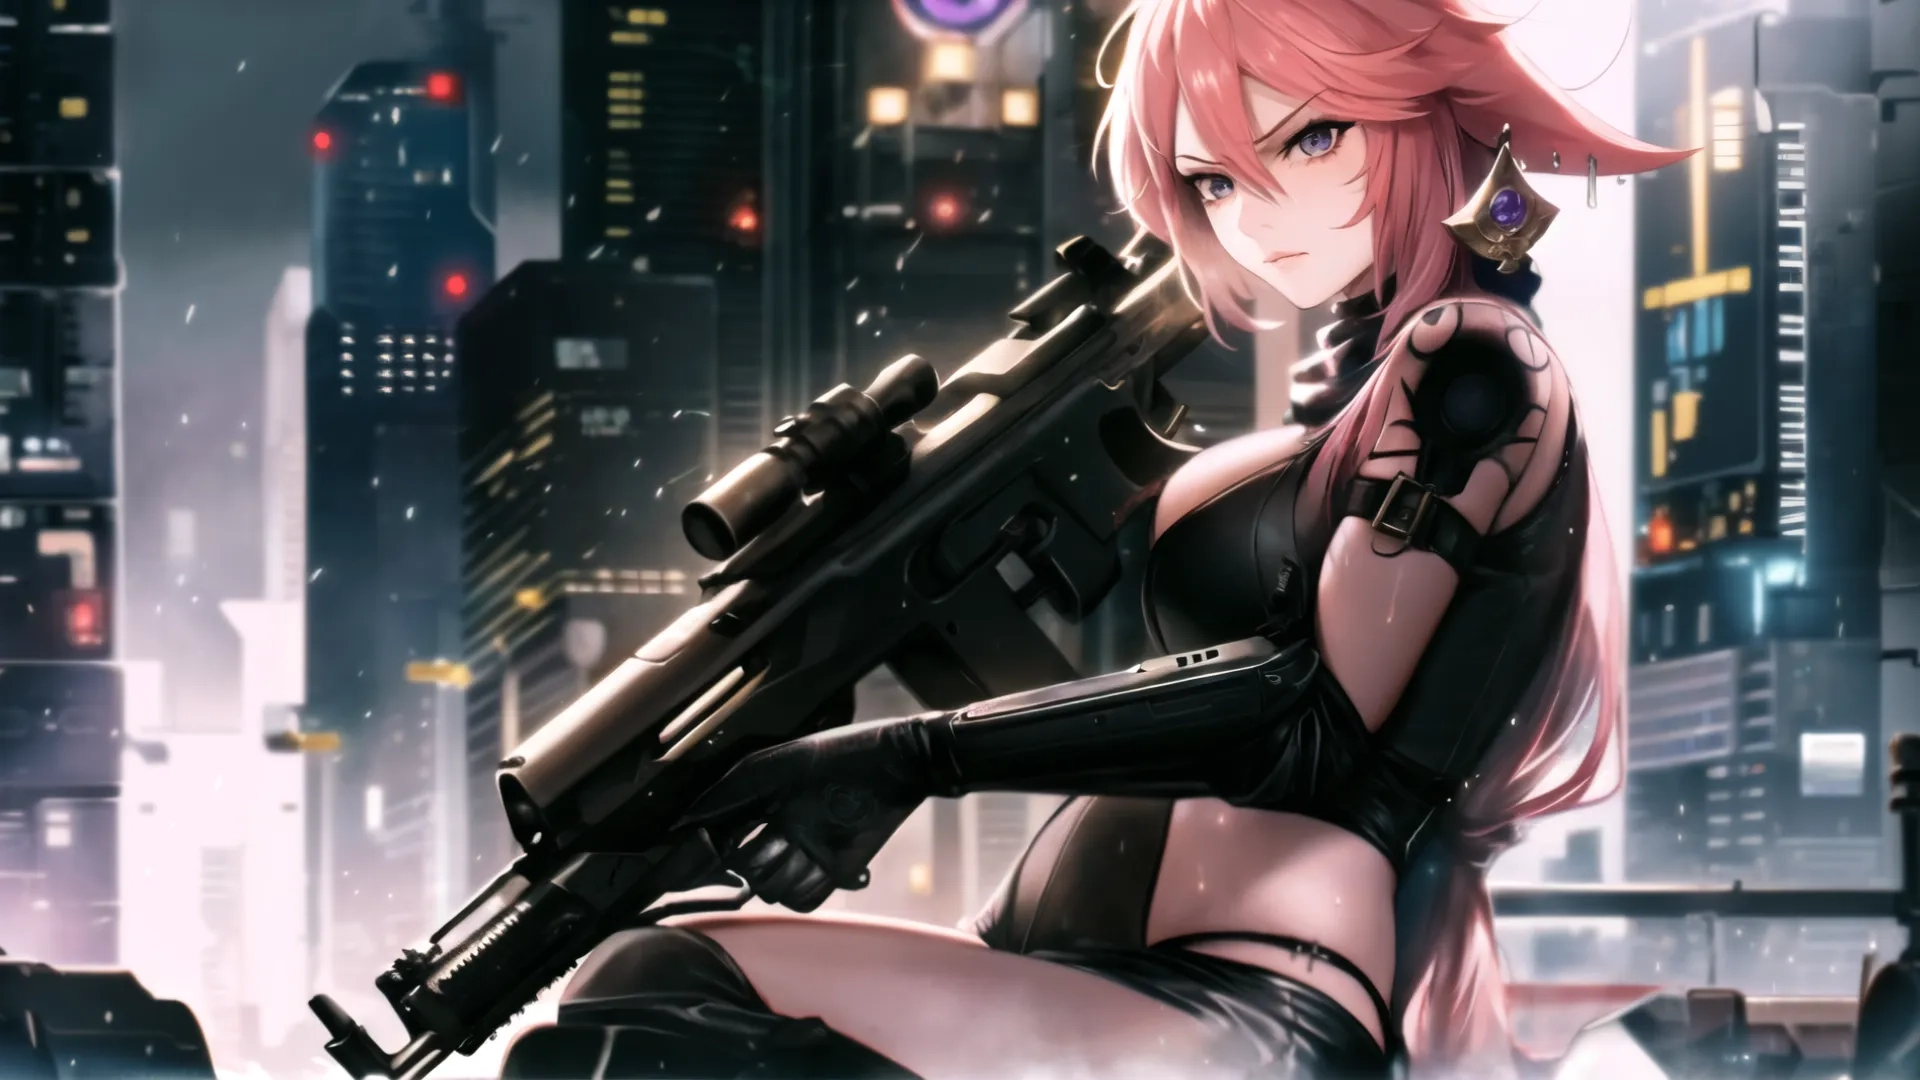 the woman with the handgun is posing for a picture in the city at night time, overweighted by buildings and traffic lights while holding her rifle
